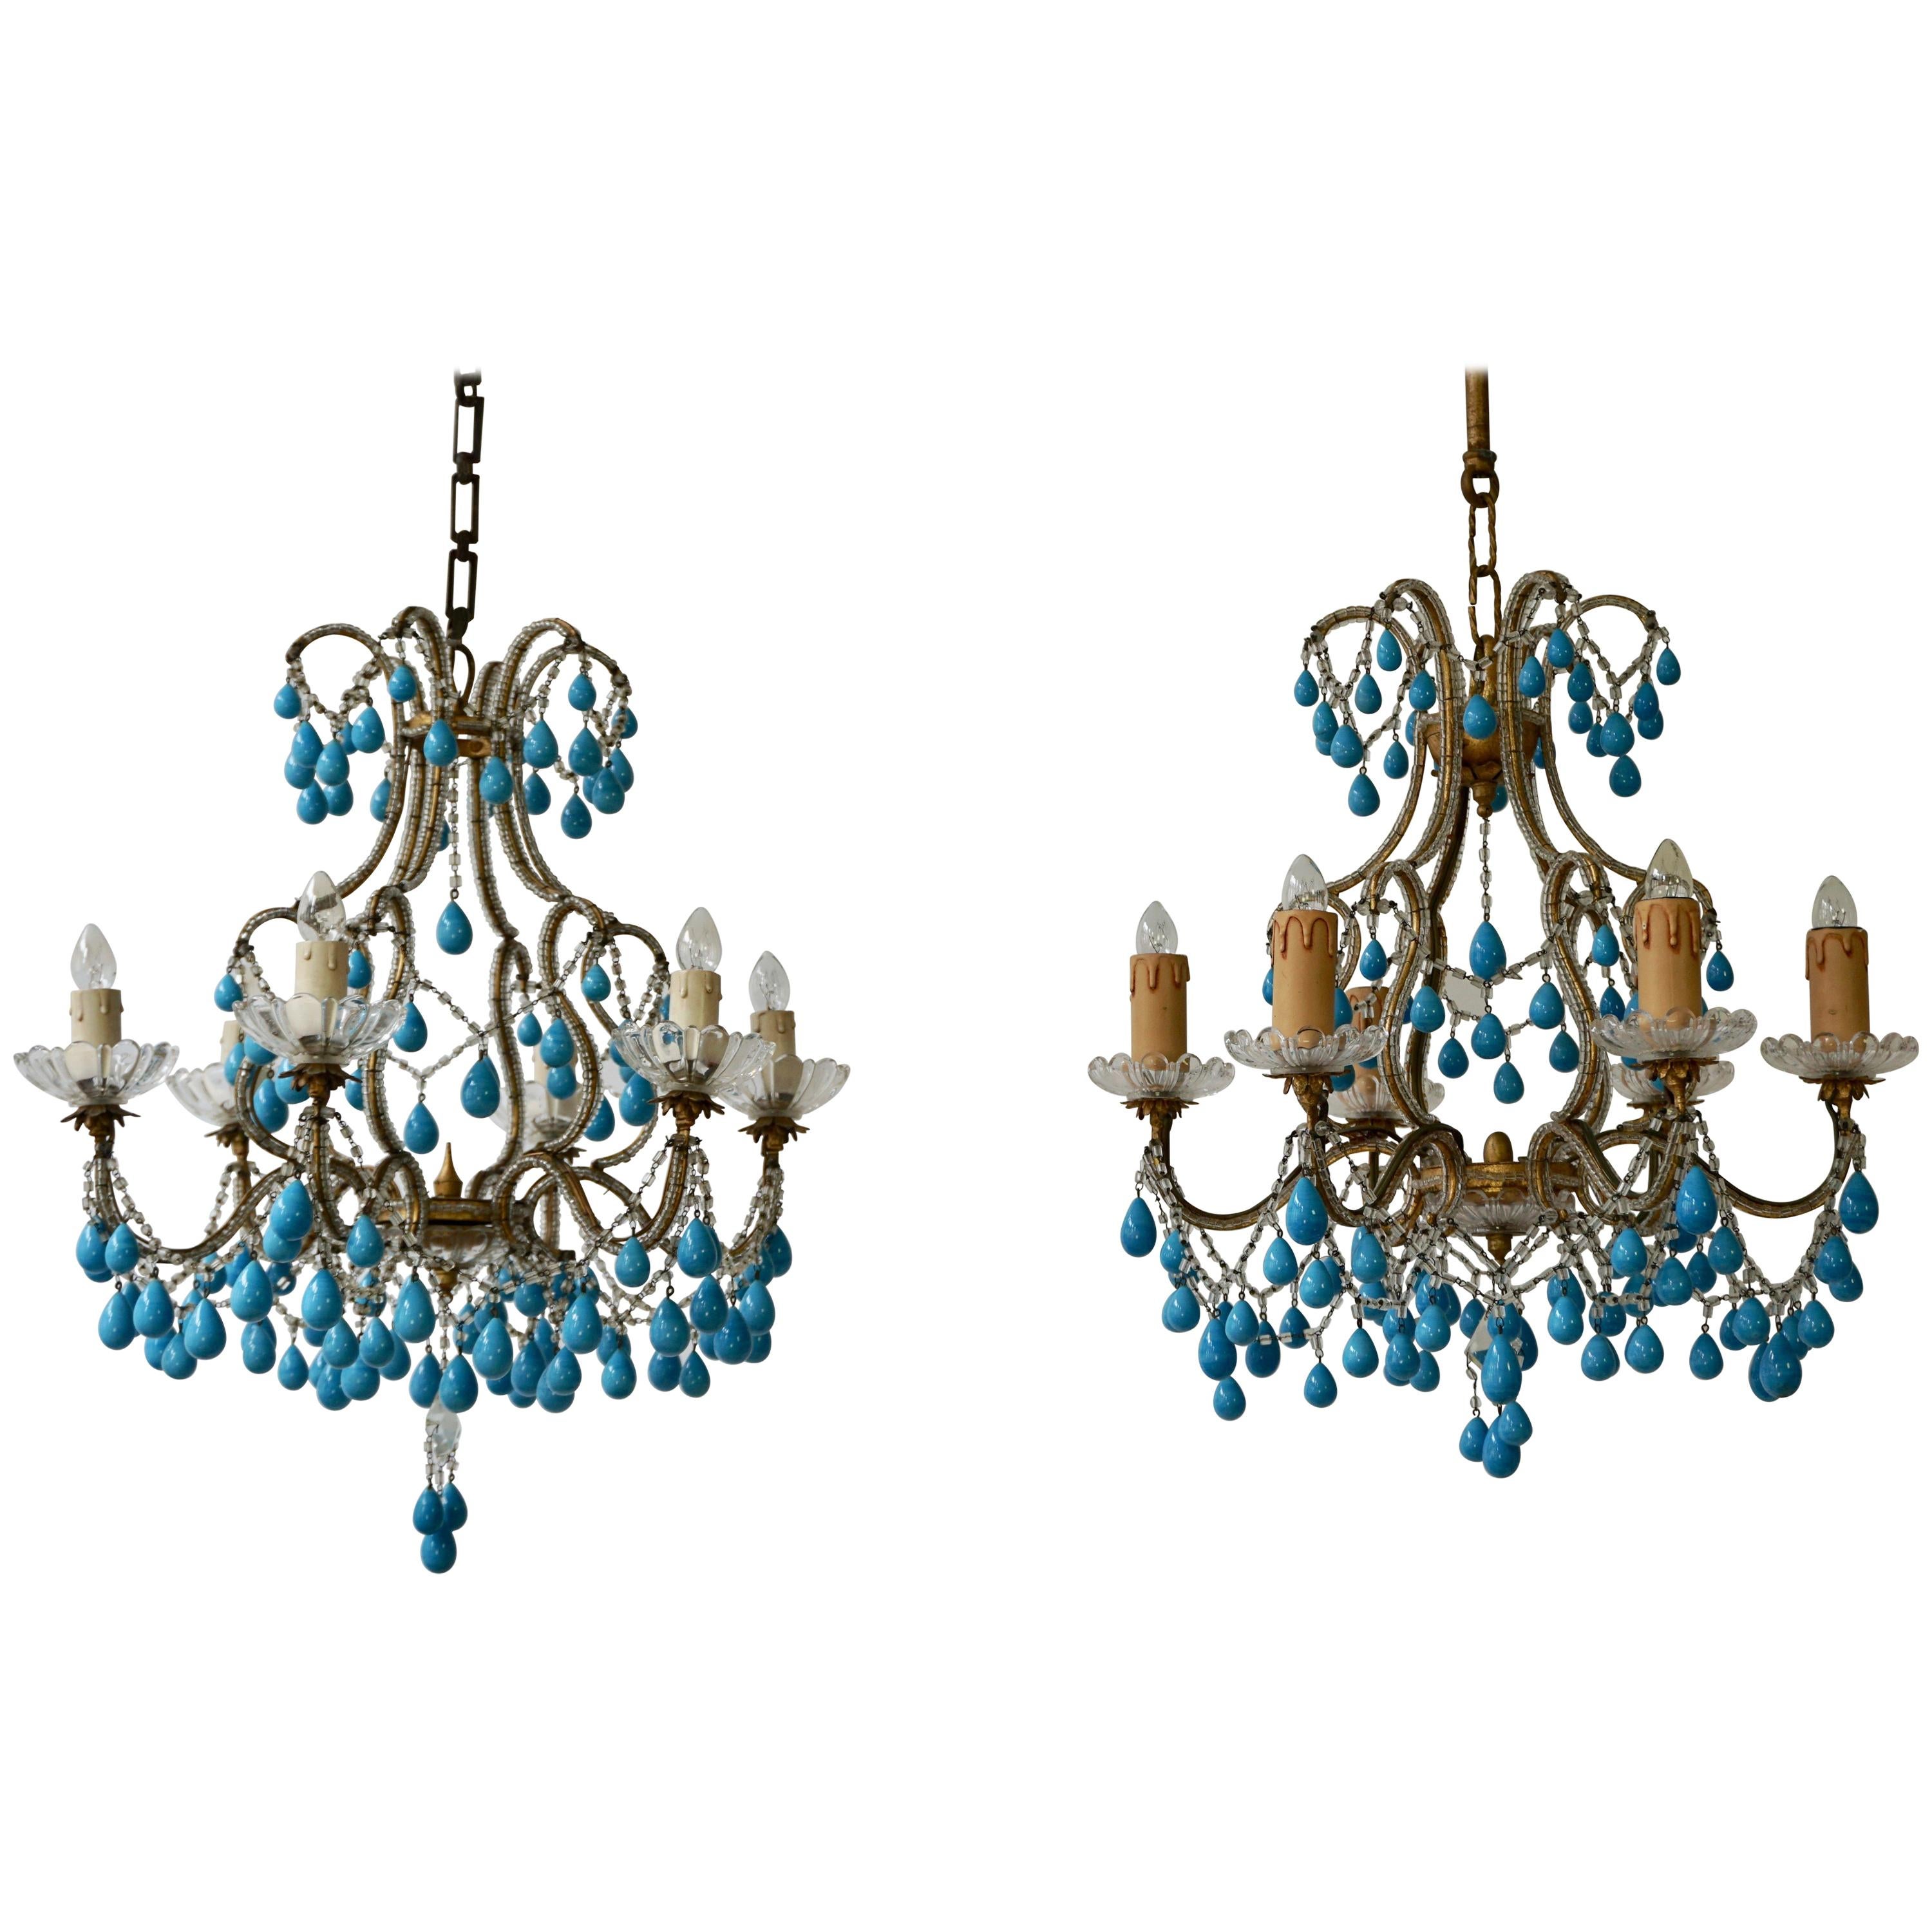 Pair of Elegant Italian Chandeliers with Turquoise Stone For Sale